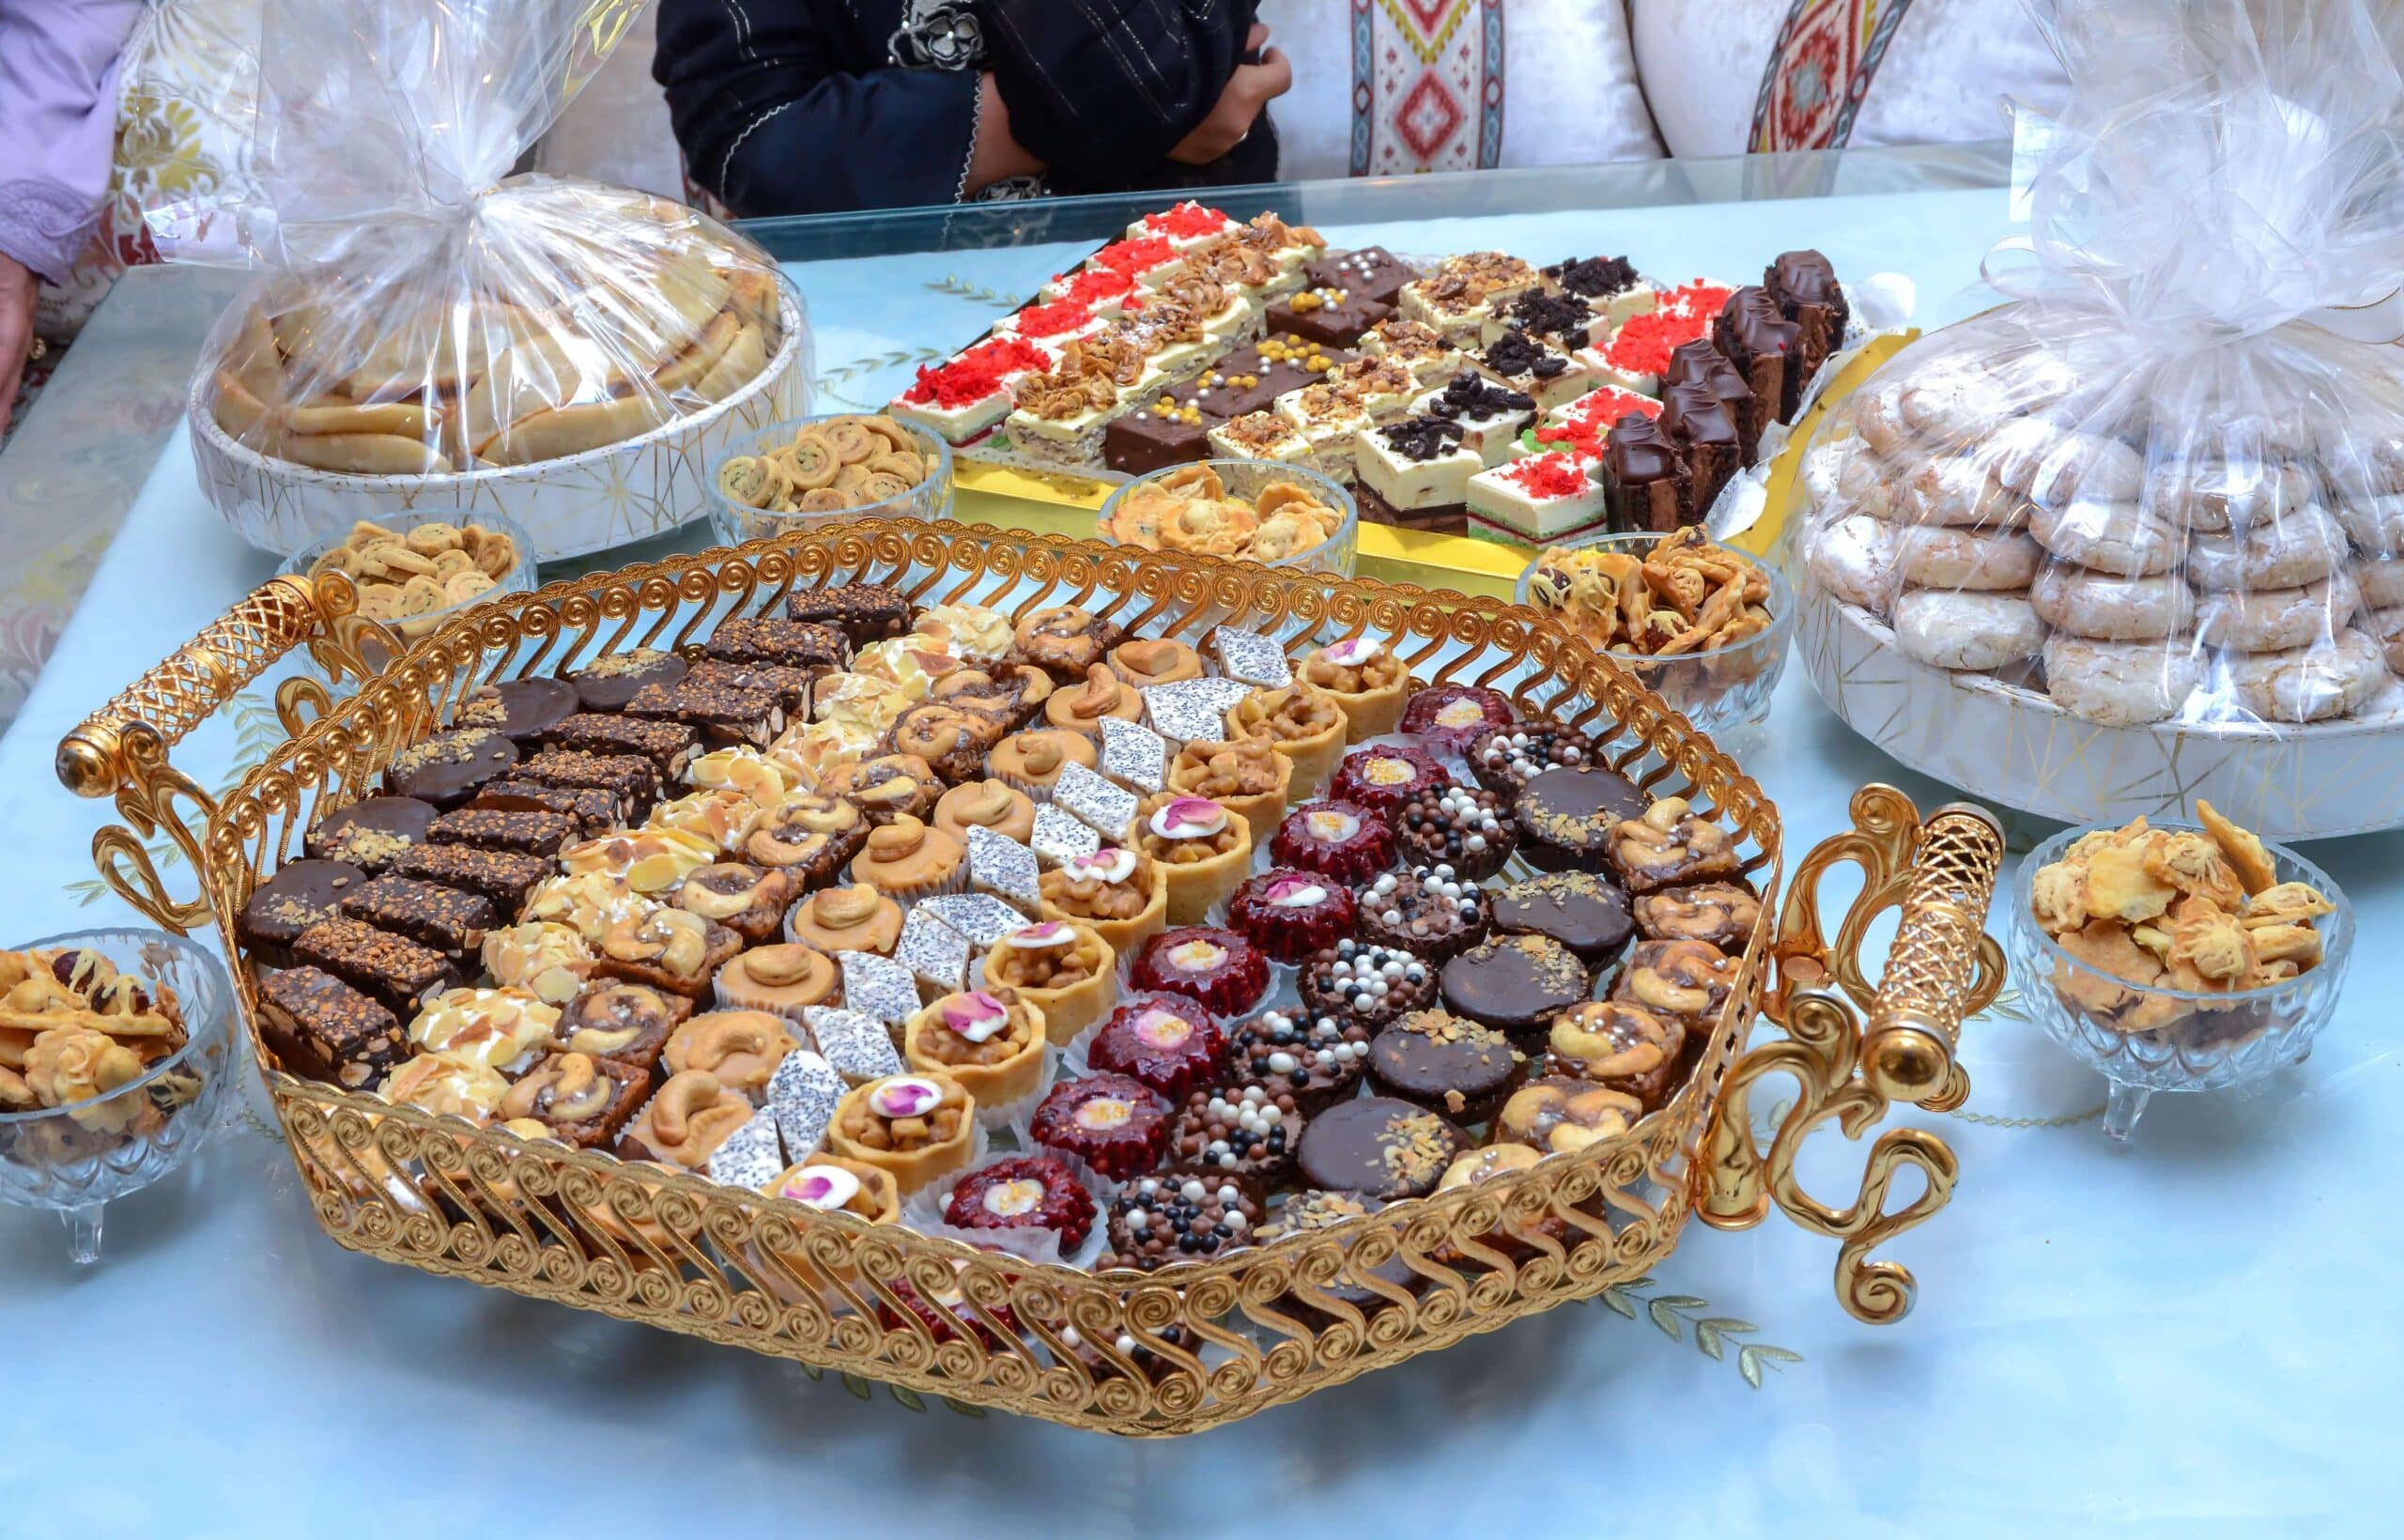 An assortment of different Moroccan pastries